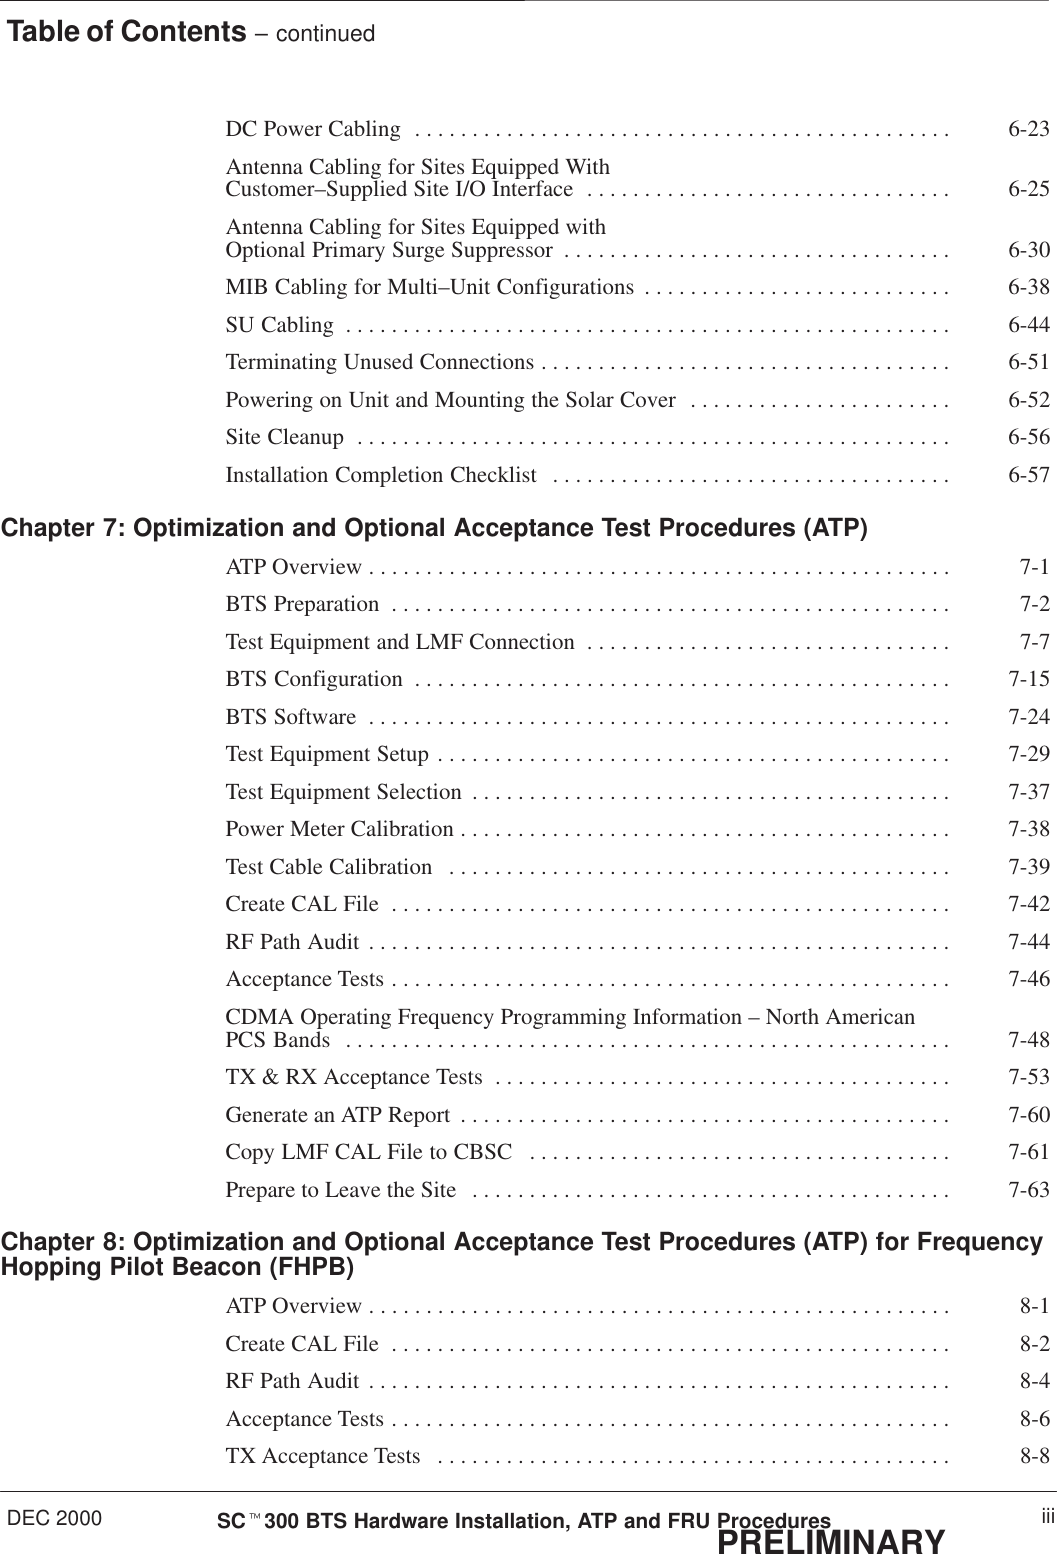 Table of Contents – continuedDEC 2000 iiiSCt300 BTS Hardware Installation, ATP and FRU ProceduresPRELIMINARYDC Power Cabling 6-23. . . . . . . . . . . . . . . . . . . . . . . . . . . . . . . . . . . . . . . . . . . . . . . Antenna Cabling for Sites Equipped With Customer–Supplied Site I/O Interface 6-25. . . . . . . . . . . . . . . . . . . . . . . . . . . . . . . . Antenna Cabling for Sites Equipped with Optional Primary Surge Suppressor 6-30. . . . . . . . . . . . . . . . . . . . . . . . . . . . . . . . . . MIB Cabling for Multi–Unit Configurations 6-38. . . . . . . . . . . . . . . . . . . . . . . . . . . SU Cabling 6-44. . . . . . . . . . . . . . . . . . . . . . . . . . . . . . . . . . . . . . . . . . . . . . . . . . . . . Terminating Unused Connections 6-51. . . . . . . . . . . . . . . . . . . . . . . . . . . . . . . . . . . . Powering on Unit and Mounting the Solar Cover 6-52. . . . . . . . . . . . . . . . . . . . . . . Site Cleanup 6-56. . . . . . . . . . . . . . . . . . . . . . . . . . . . . . . . . . . . . . . . . . . . . . . . . . . . Installation Completion Checklist 6-57. . . . . . . . . . . . . . . . . . . . . . . . . . . . . . . . . . . Chapter 7: Optimization and Optional Acceptance Test Procedures (ATP)ATP Overview 7-1. . . . . . . . . . . . . . . . . . . . . . . . . . . . . . . . . . . . . . . . . . . . . . . . . . . BTS Preparation 7-2. . . . . . . . . . . . . . . . . . . . . . . . . . . . . . . . . . . . . . . . . . . . . . . . . Test Equipment and LMF Connection 7-7. . . . . . . . . . . . . . . . . . . . . . . . . . . . . . . . BTS Configuration 7-15. . . . . . . . . . . . . . . . . . . . . . . . . . . . . . . . . . . . . . . . . . . . . . . BTS Software 7-24. . . . . . . . . . . . . . . . . . . . . . . . . . . . . . . . . . . . . . . . . . . . . . . . . . . Test Equipment Setup 7-29. . . . . . . . . . . . . . . . . . . . . . . . . . . . . . . . . . . . . . . . . . . . . Test Equipment Selection 7-37. . . . . . . . . . . . . . . . . . . . . . . . . . . . . . . . . . . . . . . . . . Power Meter Calibration 7-38. . . . . . . . . . . . . . . . . . . . . . . . . . . . . . . . . . . . . . . . . . . Test Cable Calibration 7-39. . . . . . . . . . . . . . . . . . . . . . . . . . . . . . . . . . . . . . . . . . . . Create CAL File 7-42. . . . . . . . . . . . . . . . . . . . . . . . . . . . . . . . . . . . . . . . . . . . . . . . . RF Path Audit 7-44. . . . . . . . . . . . . . . . . . . . . . . . . . . . . . . . . . . . . . . . . . . . . . . . . . . Acceptance Tests 7-46. . . . . . . . . . . . . . . . . . . . . . . . . . . . . . . . . . . . . . . . . . . . . . . . . CDMA Operating Frequency Programming Information – North American PCS Bands 7-48. . . . . . . . . . . . . . . . . . . . . . . . . . . . . . . . . . . . . . . . . . . . . . . . . . . . . TX &amp; RX Acceptance Tests 7-53. . . . . . . . . . . . . . . . . . . . . . . . . . . . . . . . . . . . . . . . Generate an ATP Report 7-60. . . . . . . . . . . . . . . . . . . . . . . . . . . . . . . . . . . . . . . . . . . Copy LMF CAL File to CBSC 7-61. . . . . . . . . . . . . . . . . . . . . . . . . . . . . . . . . . . . . Prepare to Leave the Site 7-63. . . . . . . . . . . . . . . . . . . . . . . . . . . . . . . . . . . . . . . . . . Chapter 8: Optimization and Optional Acceptance Test Procedures (ATP) for FrequencyHopping Pilot Beacon (FHPB)ATP Overview 8-1. . . . . . . . . . . . . . . . . . . . . . . . . . . . . . . . . . . . . . . . . . . . . . . . . . . Create CAL File 8-2. . . . . . . . . . . . . . . . . . . . . . . . . . . . . . . . . . . . . . . . . . . . . . . . . RF Path Audit 8-4. . . . . . . . . . . . . . . . . . . . . . . . . . . . . . . . . . . . . . . . . . . . . . . . . . . Acceptance Tests 8-6. . . . . . . . . . . . . . . . . . . . . . . . . . . . . . . . . . . . . . . . . . . . . . . . . TX Acceptance Tests 8-8. . . . . . . . . . . . . . . . . . . . . . . . . . . . . . . . . . . . . . . . . . . . . 